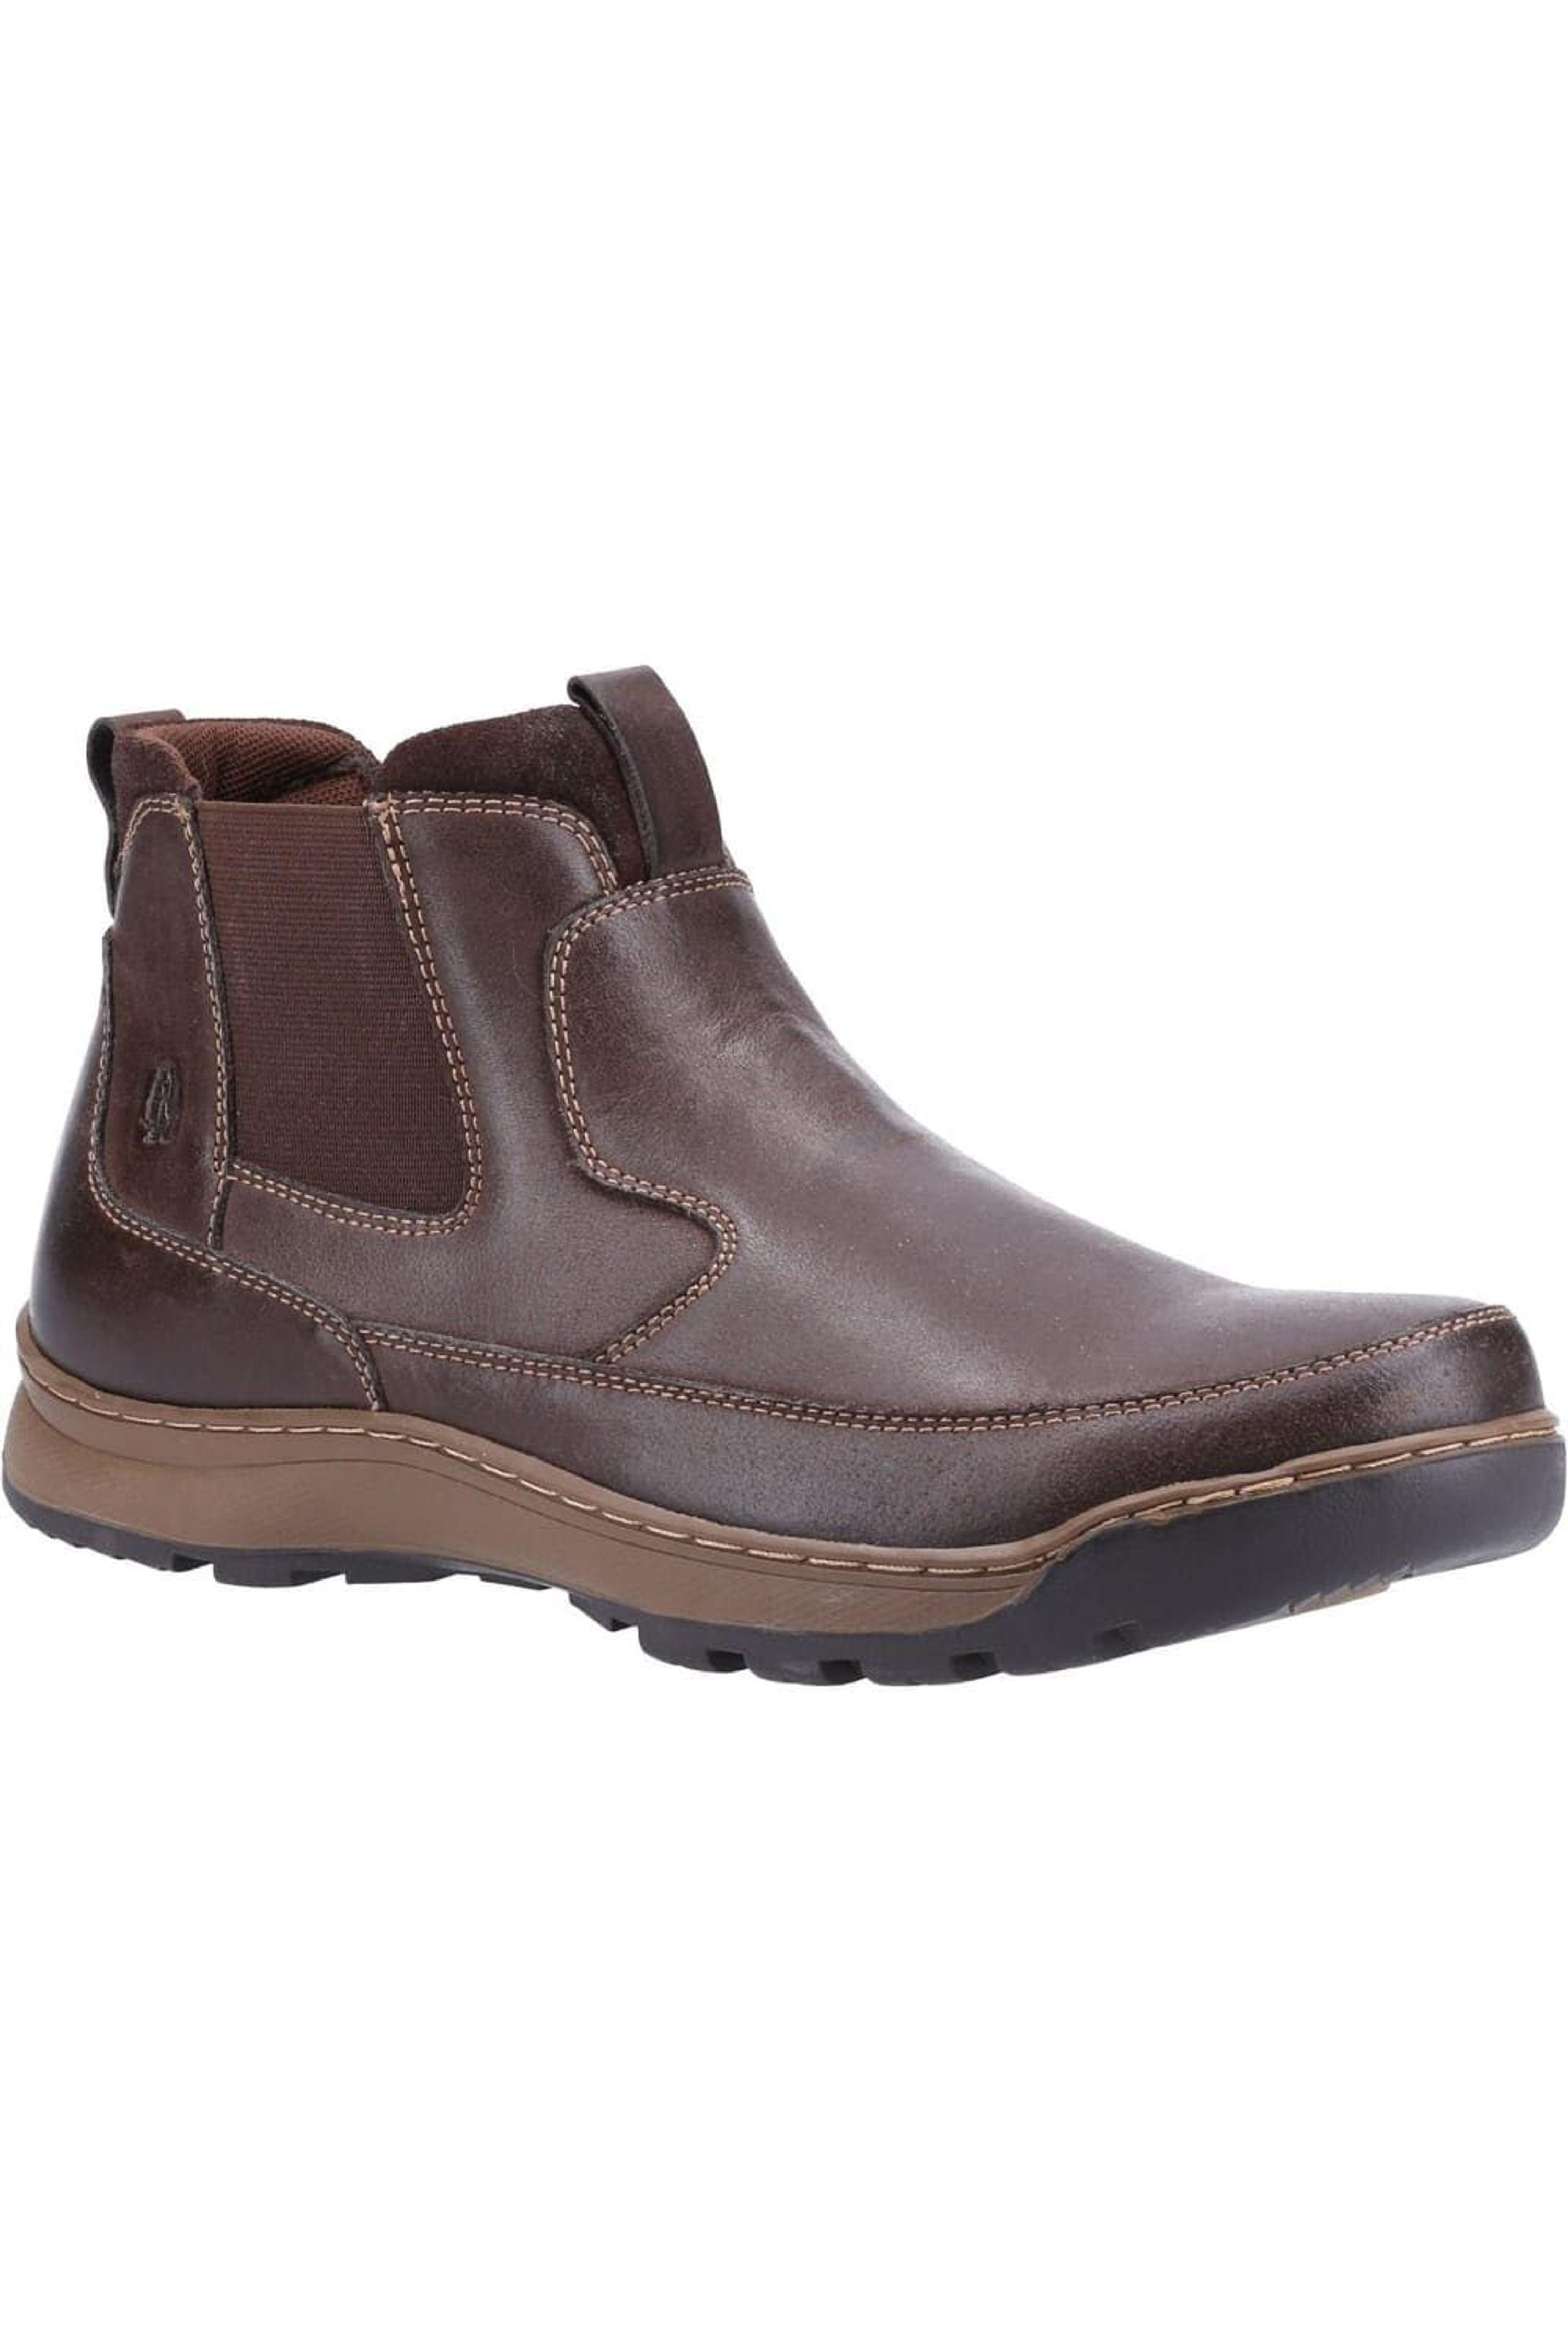 Hush Puppies Gavin Leather Chelsea Boots in Brown for Men | Lyst